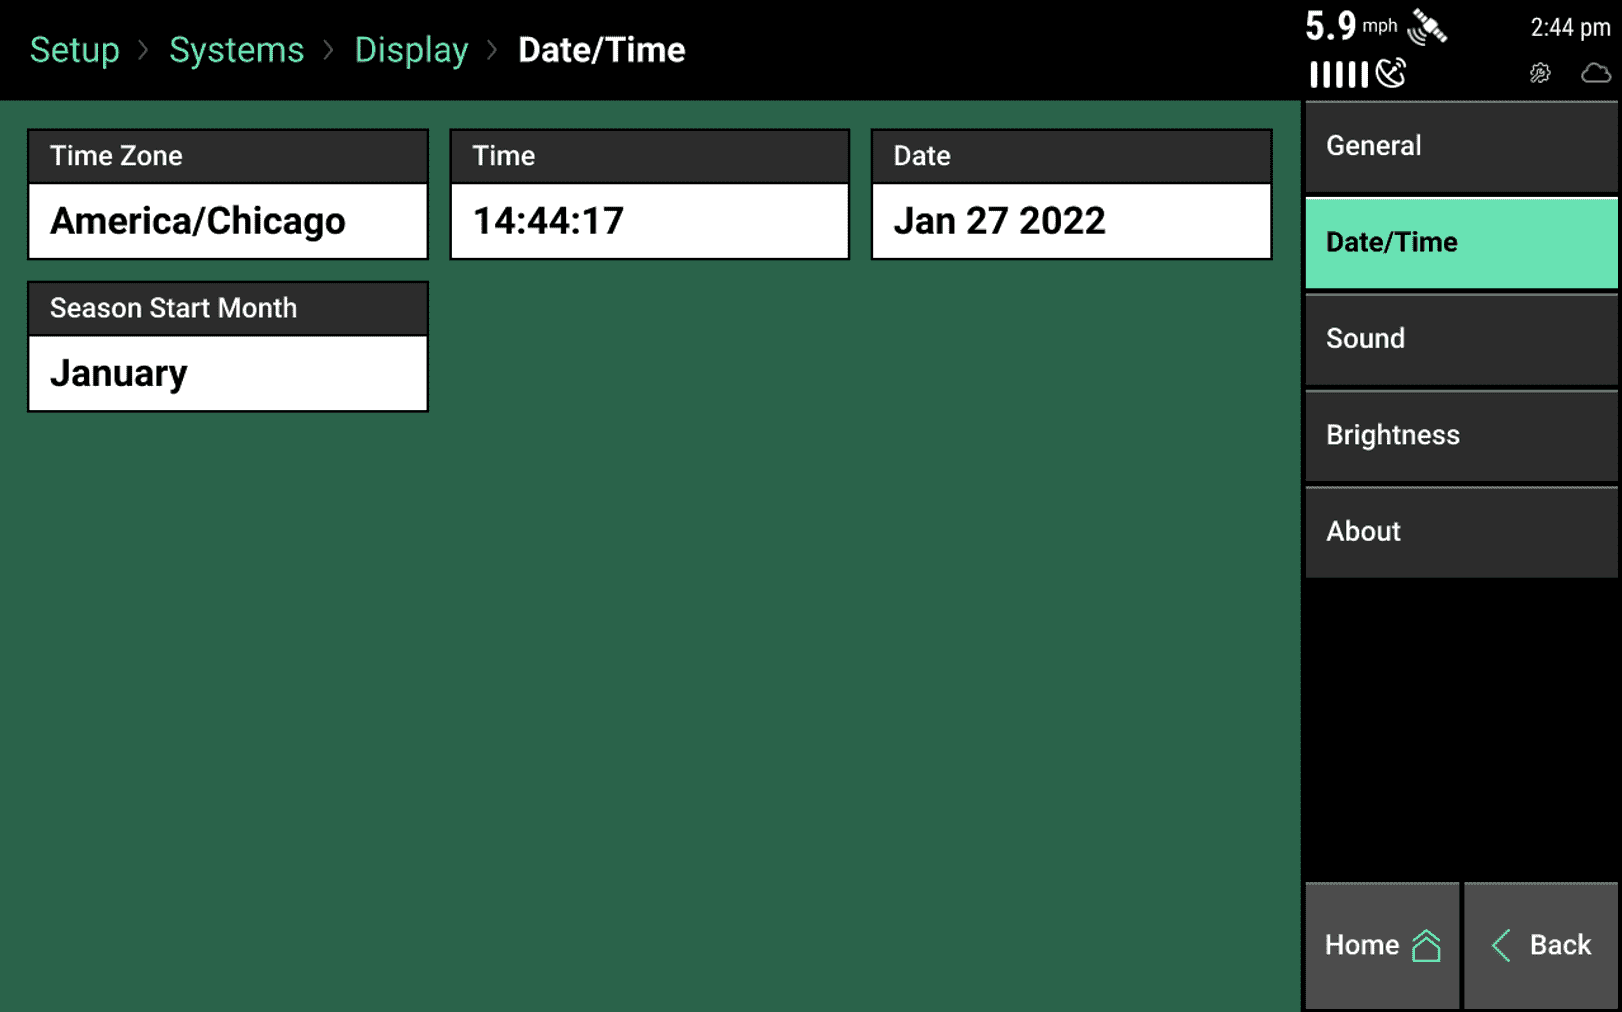 Date/Time page under Display Settings, showing new Season Start Month option